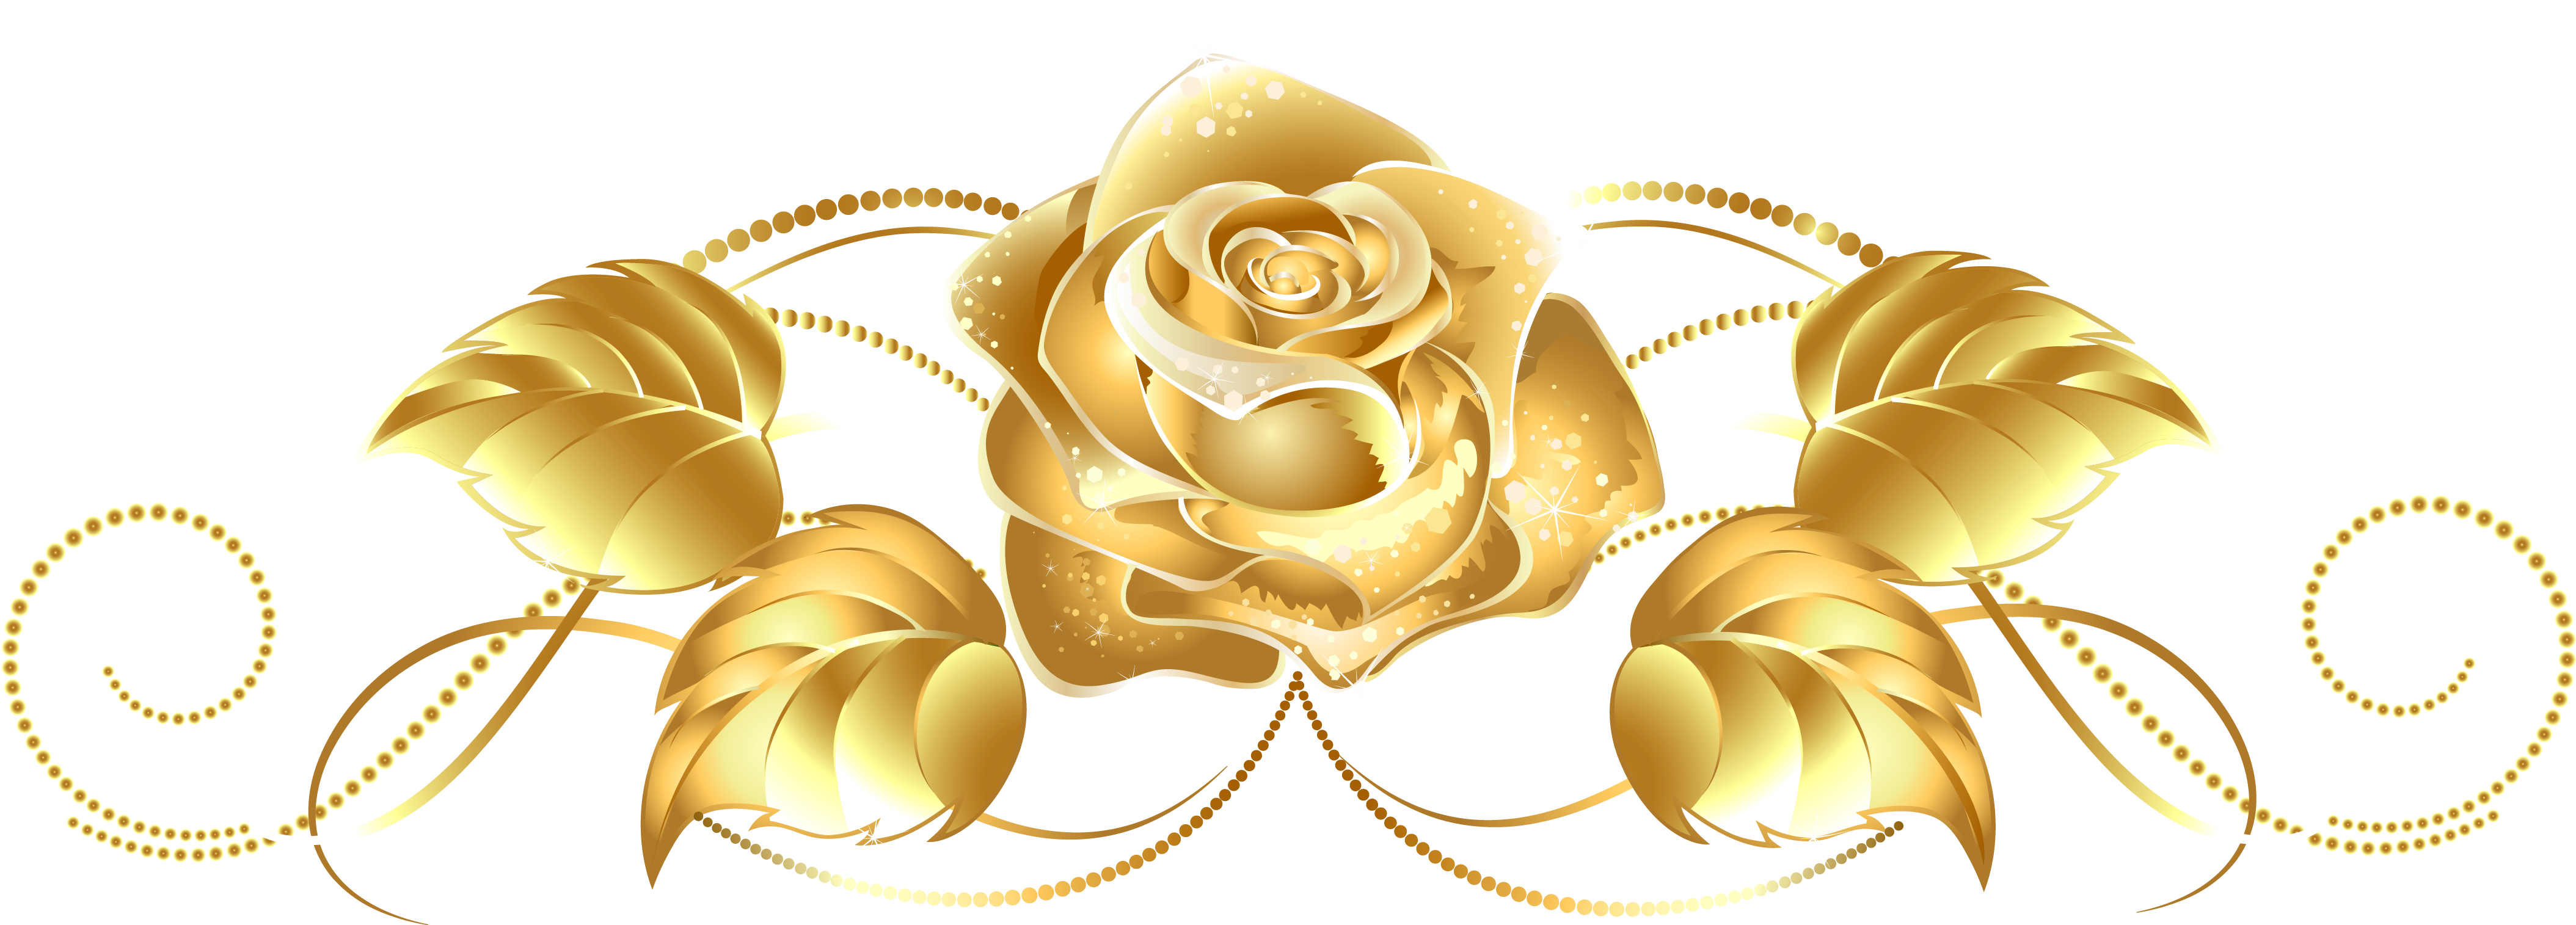 Gold Flower Clipart - Merry Christmas Greeting Cards (4486x1770)